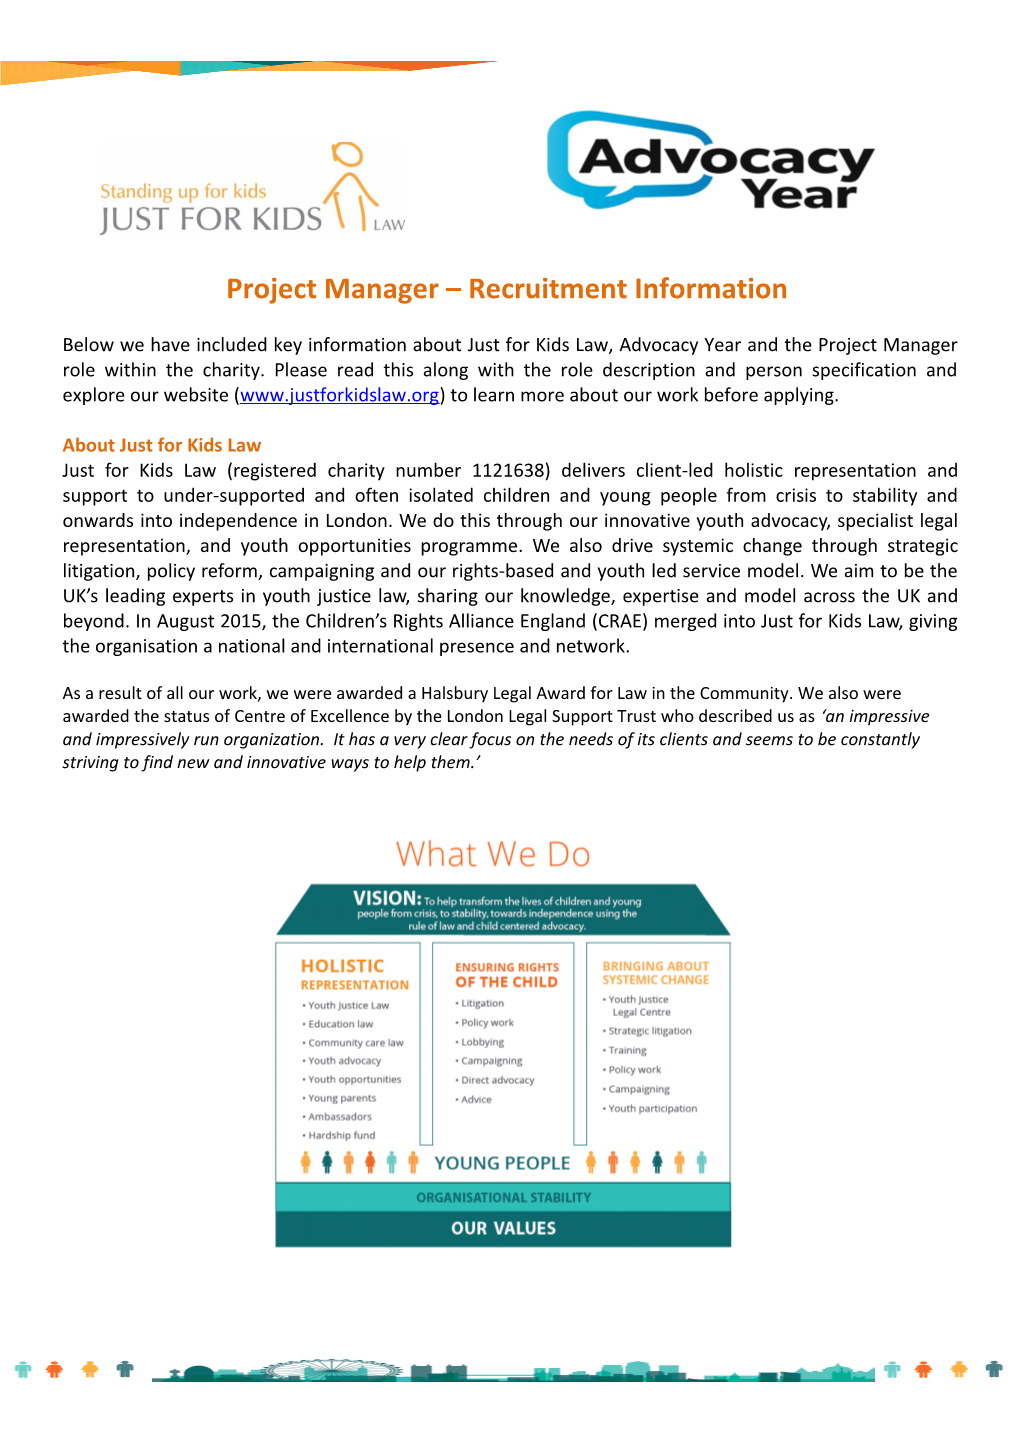 Project Manager Recruitment Information